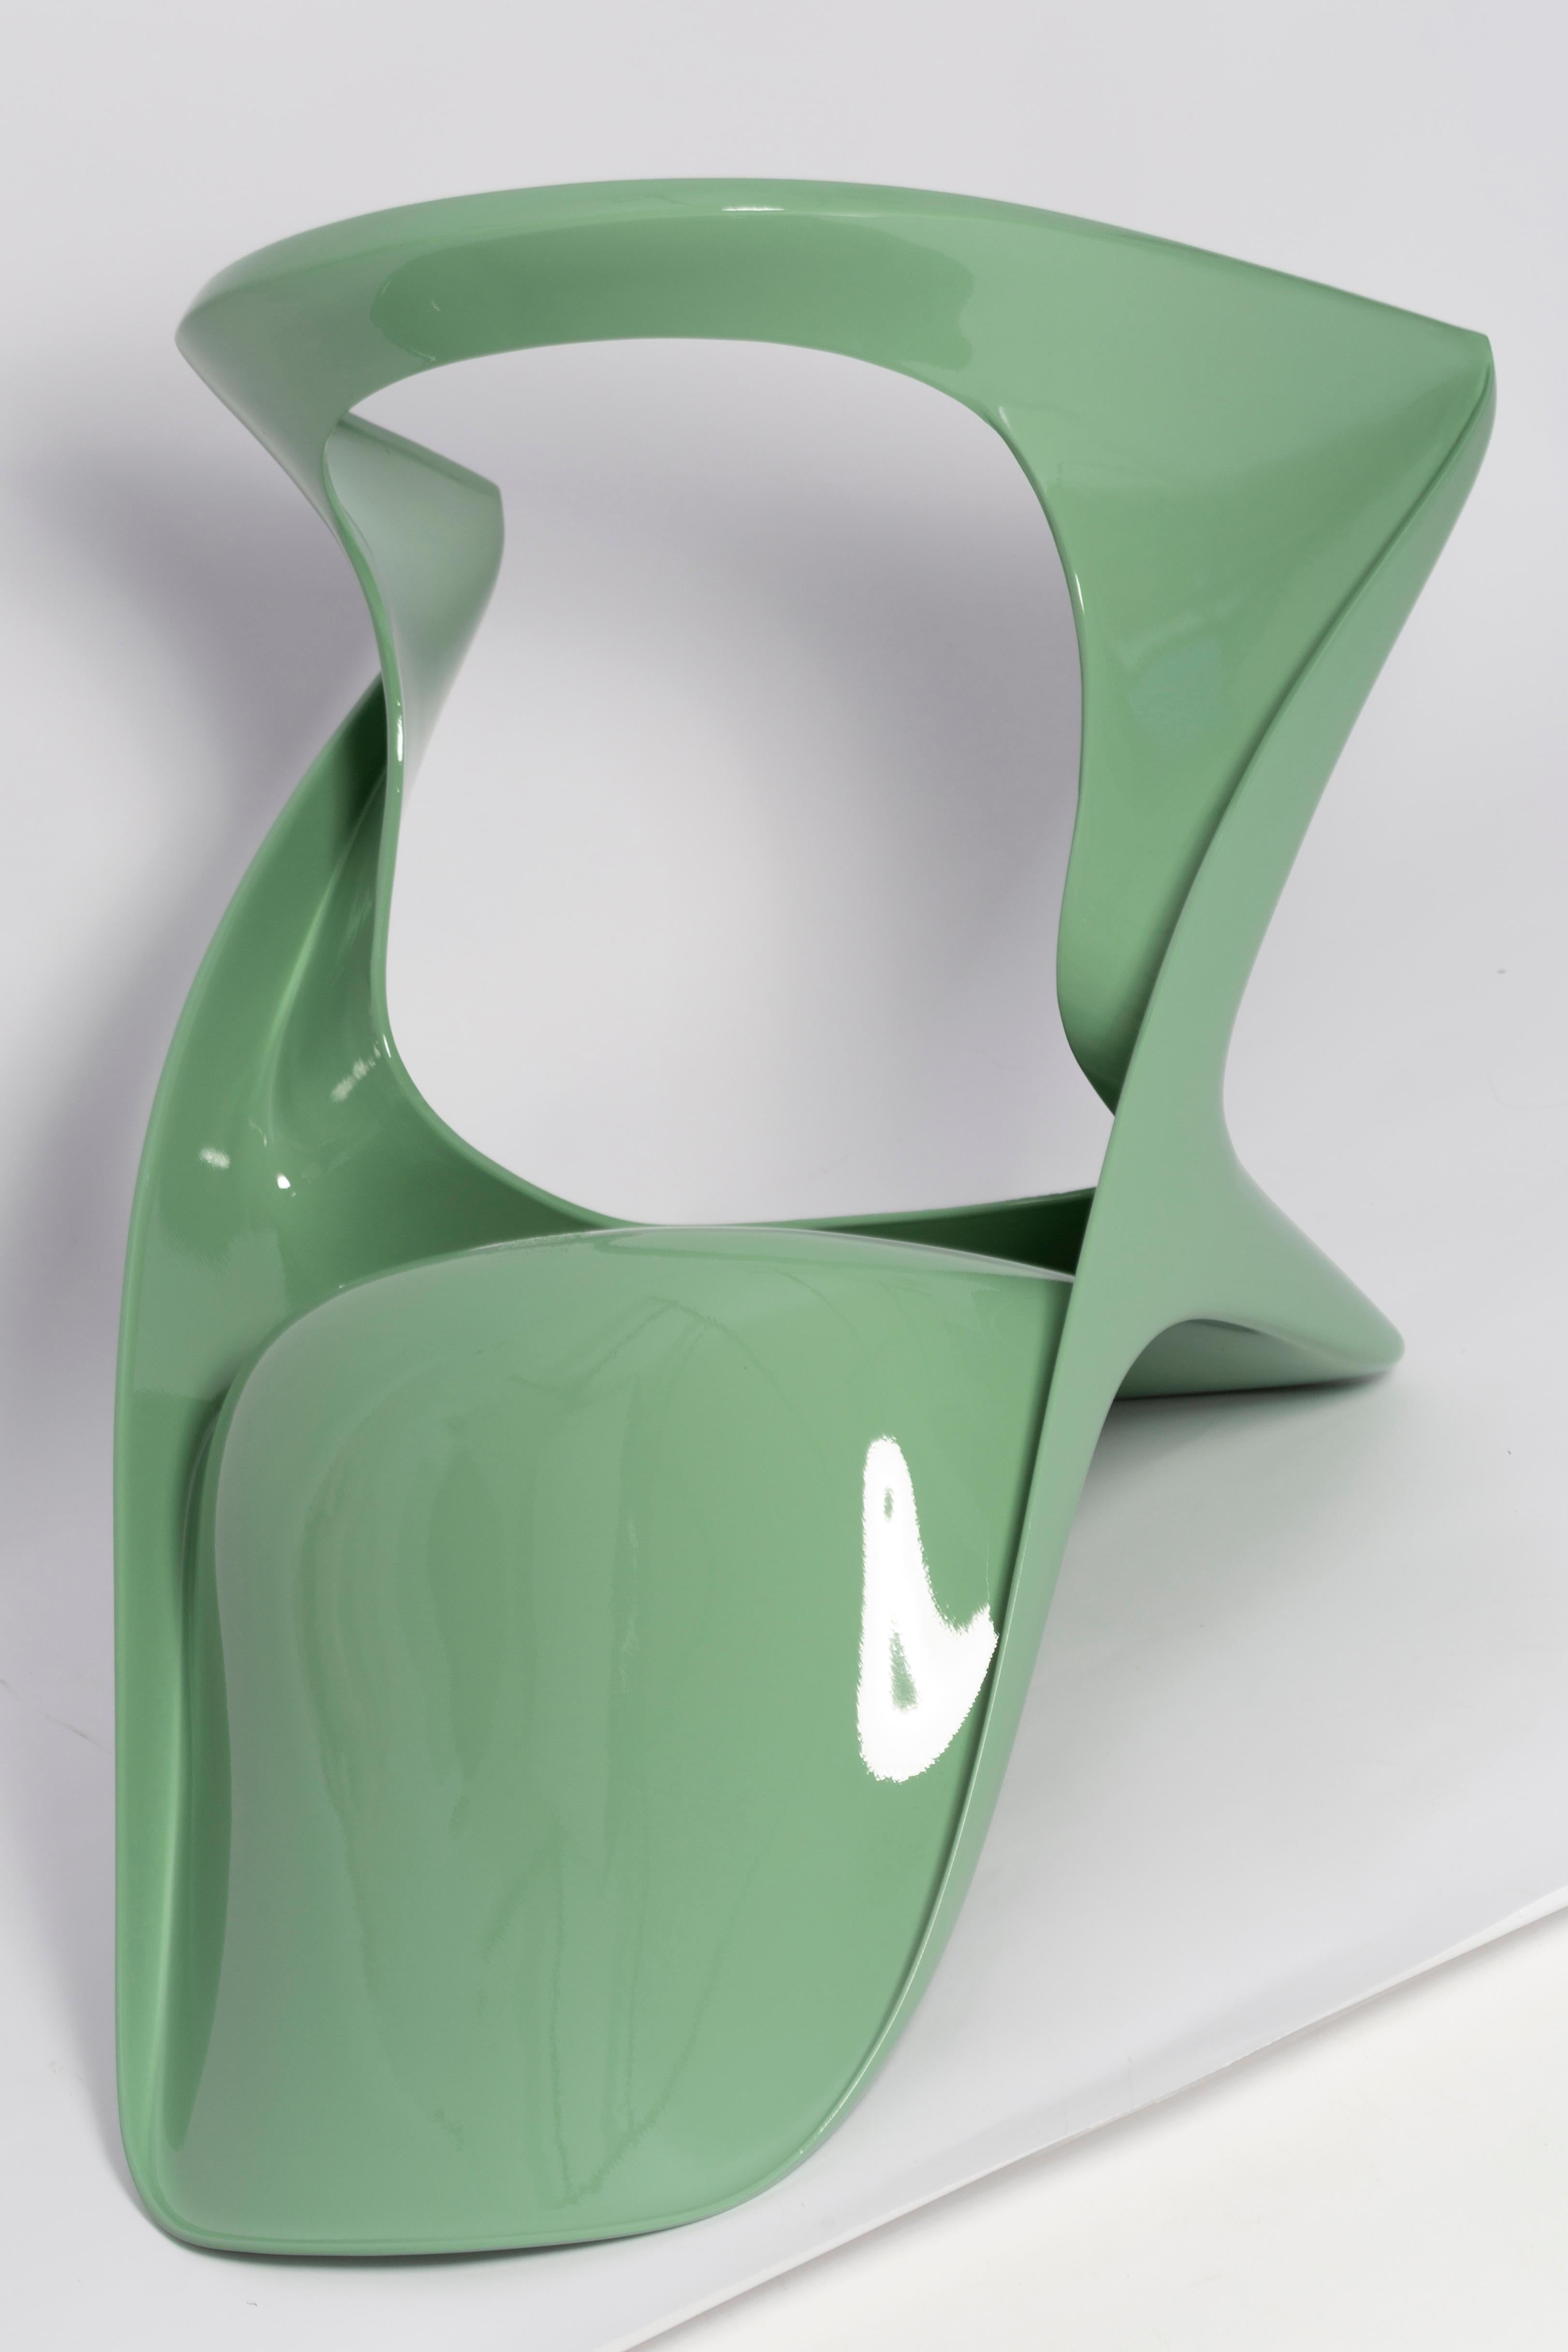 Four Mid-Century Casalino Chairs in Jade Green, Alexander Begge, Casala, 1970s For Sale 3